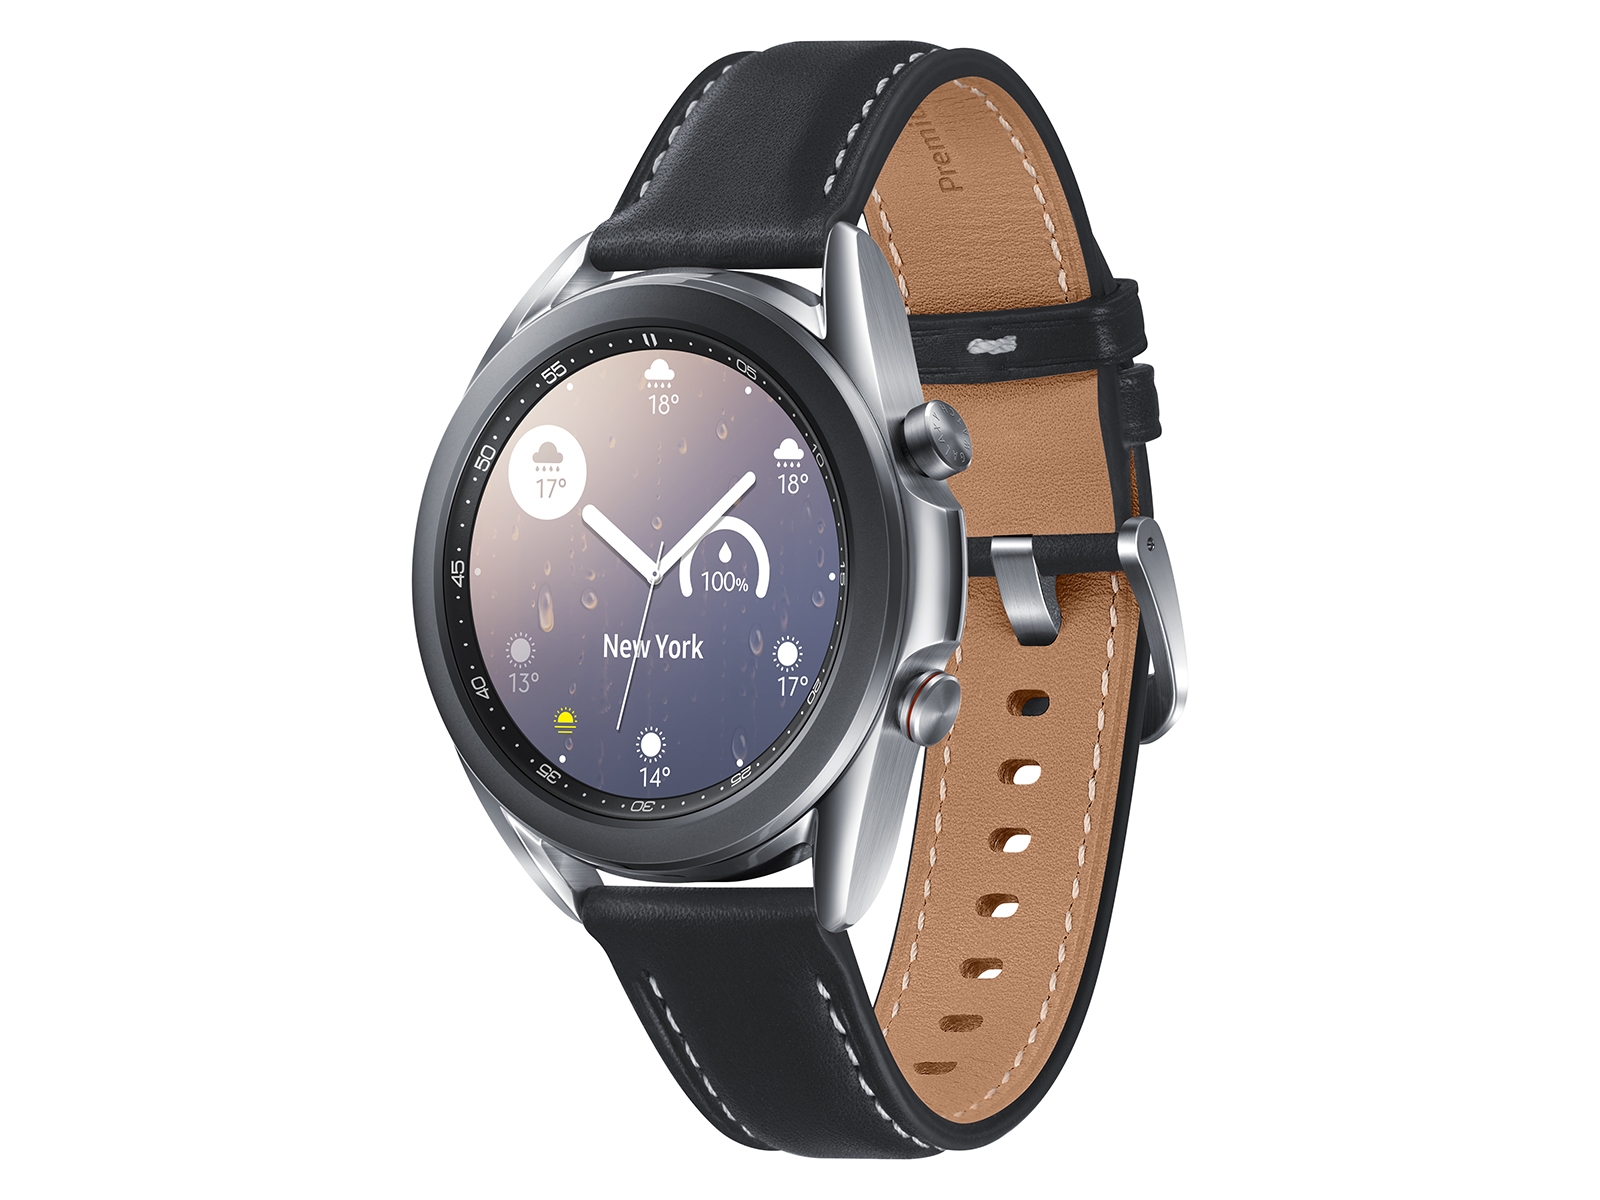 shoppers rush to buy 'sleek and stylish' £80 smartwatch now scanning  for £25